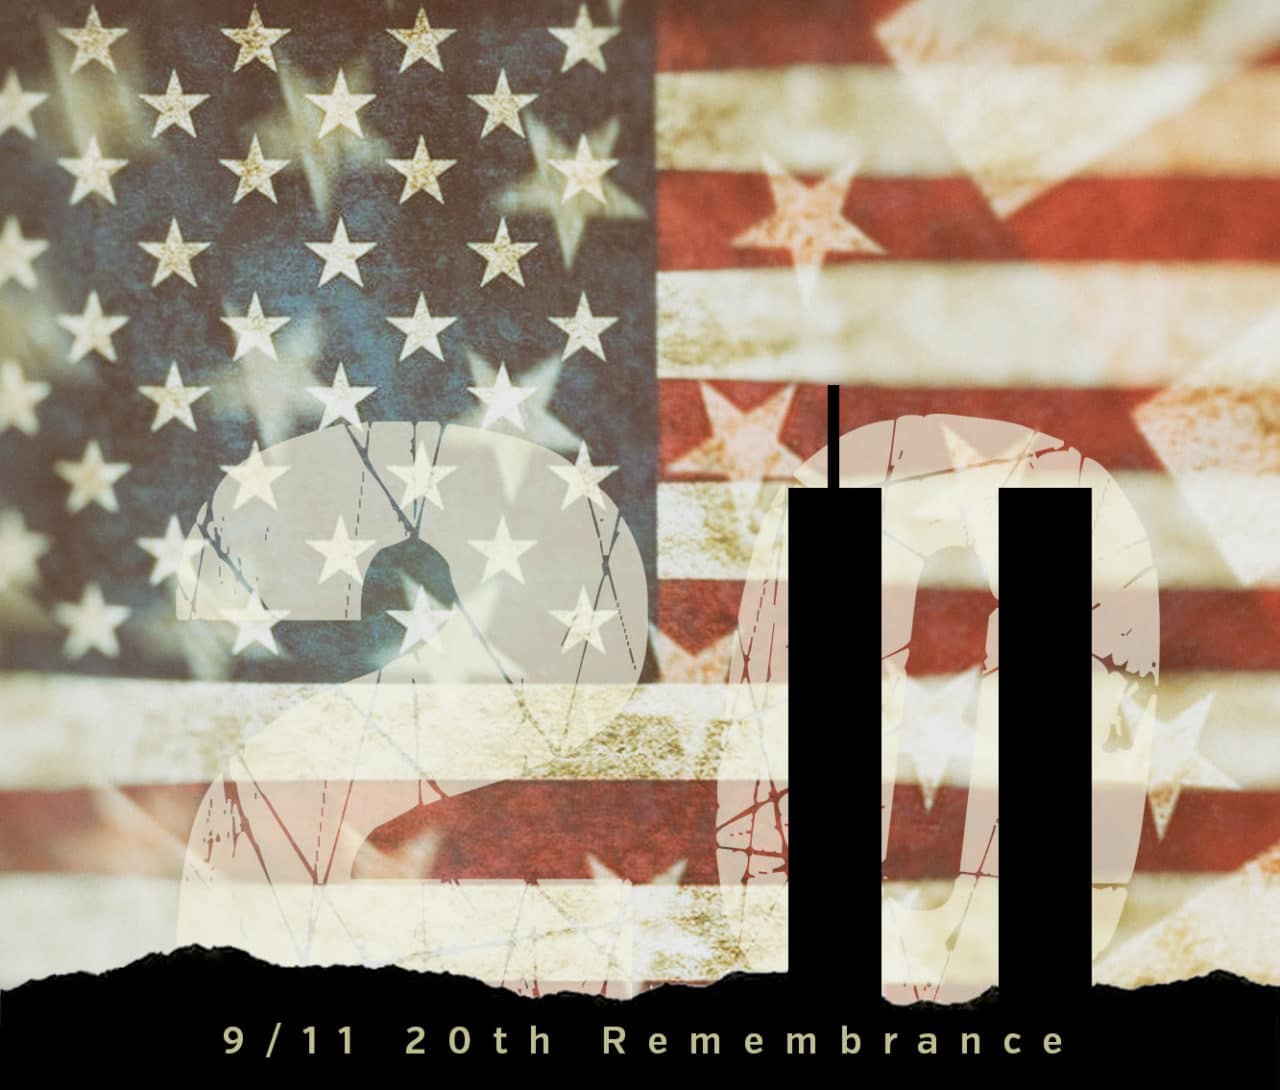 9/11 20th Remembrance Exhibit Opening Saturday, September 11